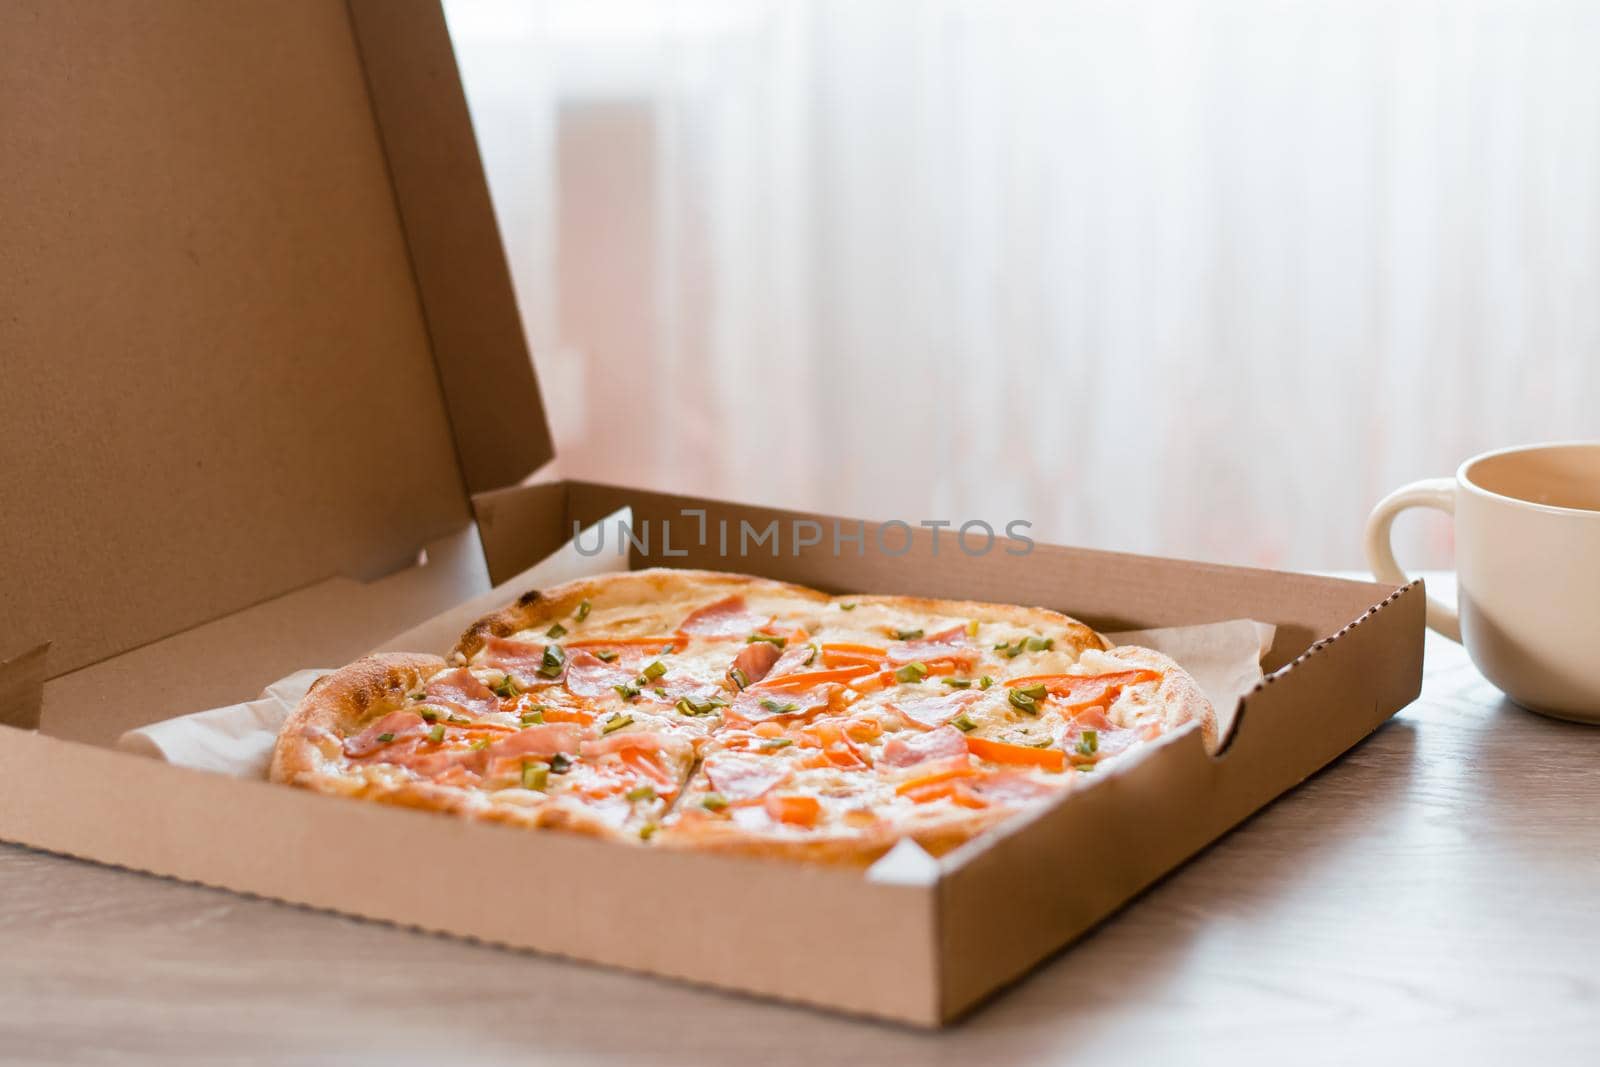 Takeaway food. Pizza in a cardboard box on the table in the kitchen.